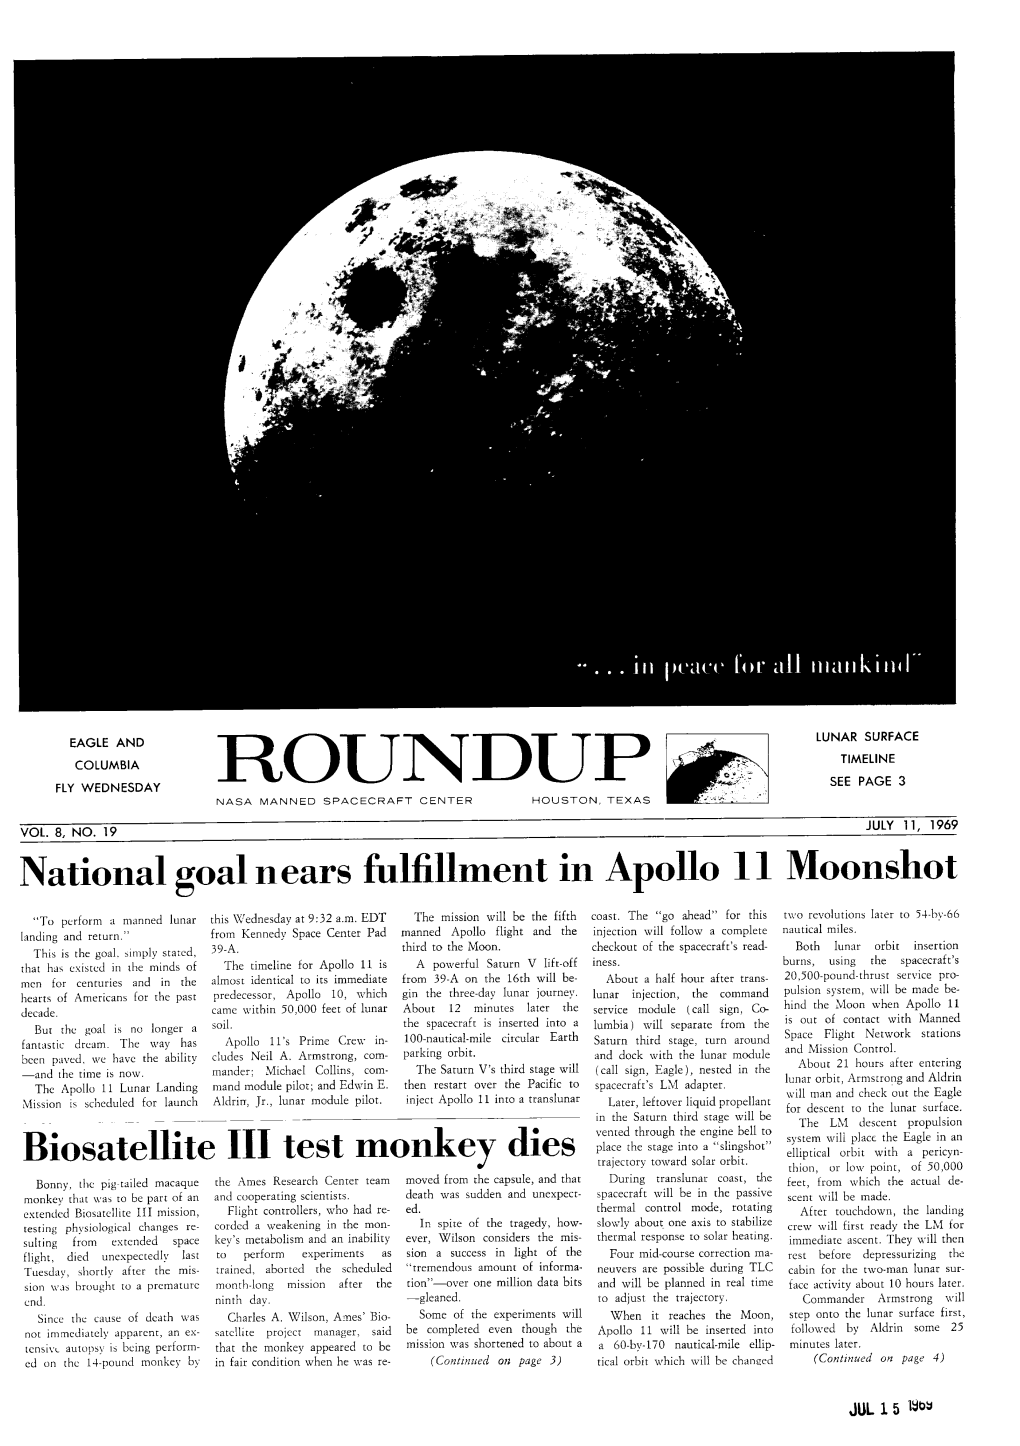 Roundup See Page 3 Nasa Manned Spacecraft Center Houston, Texas